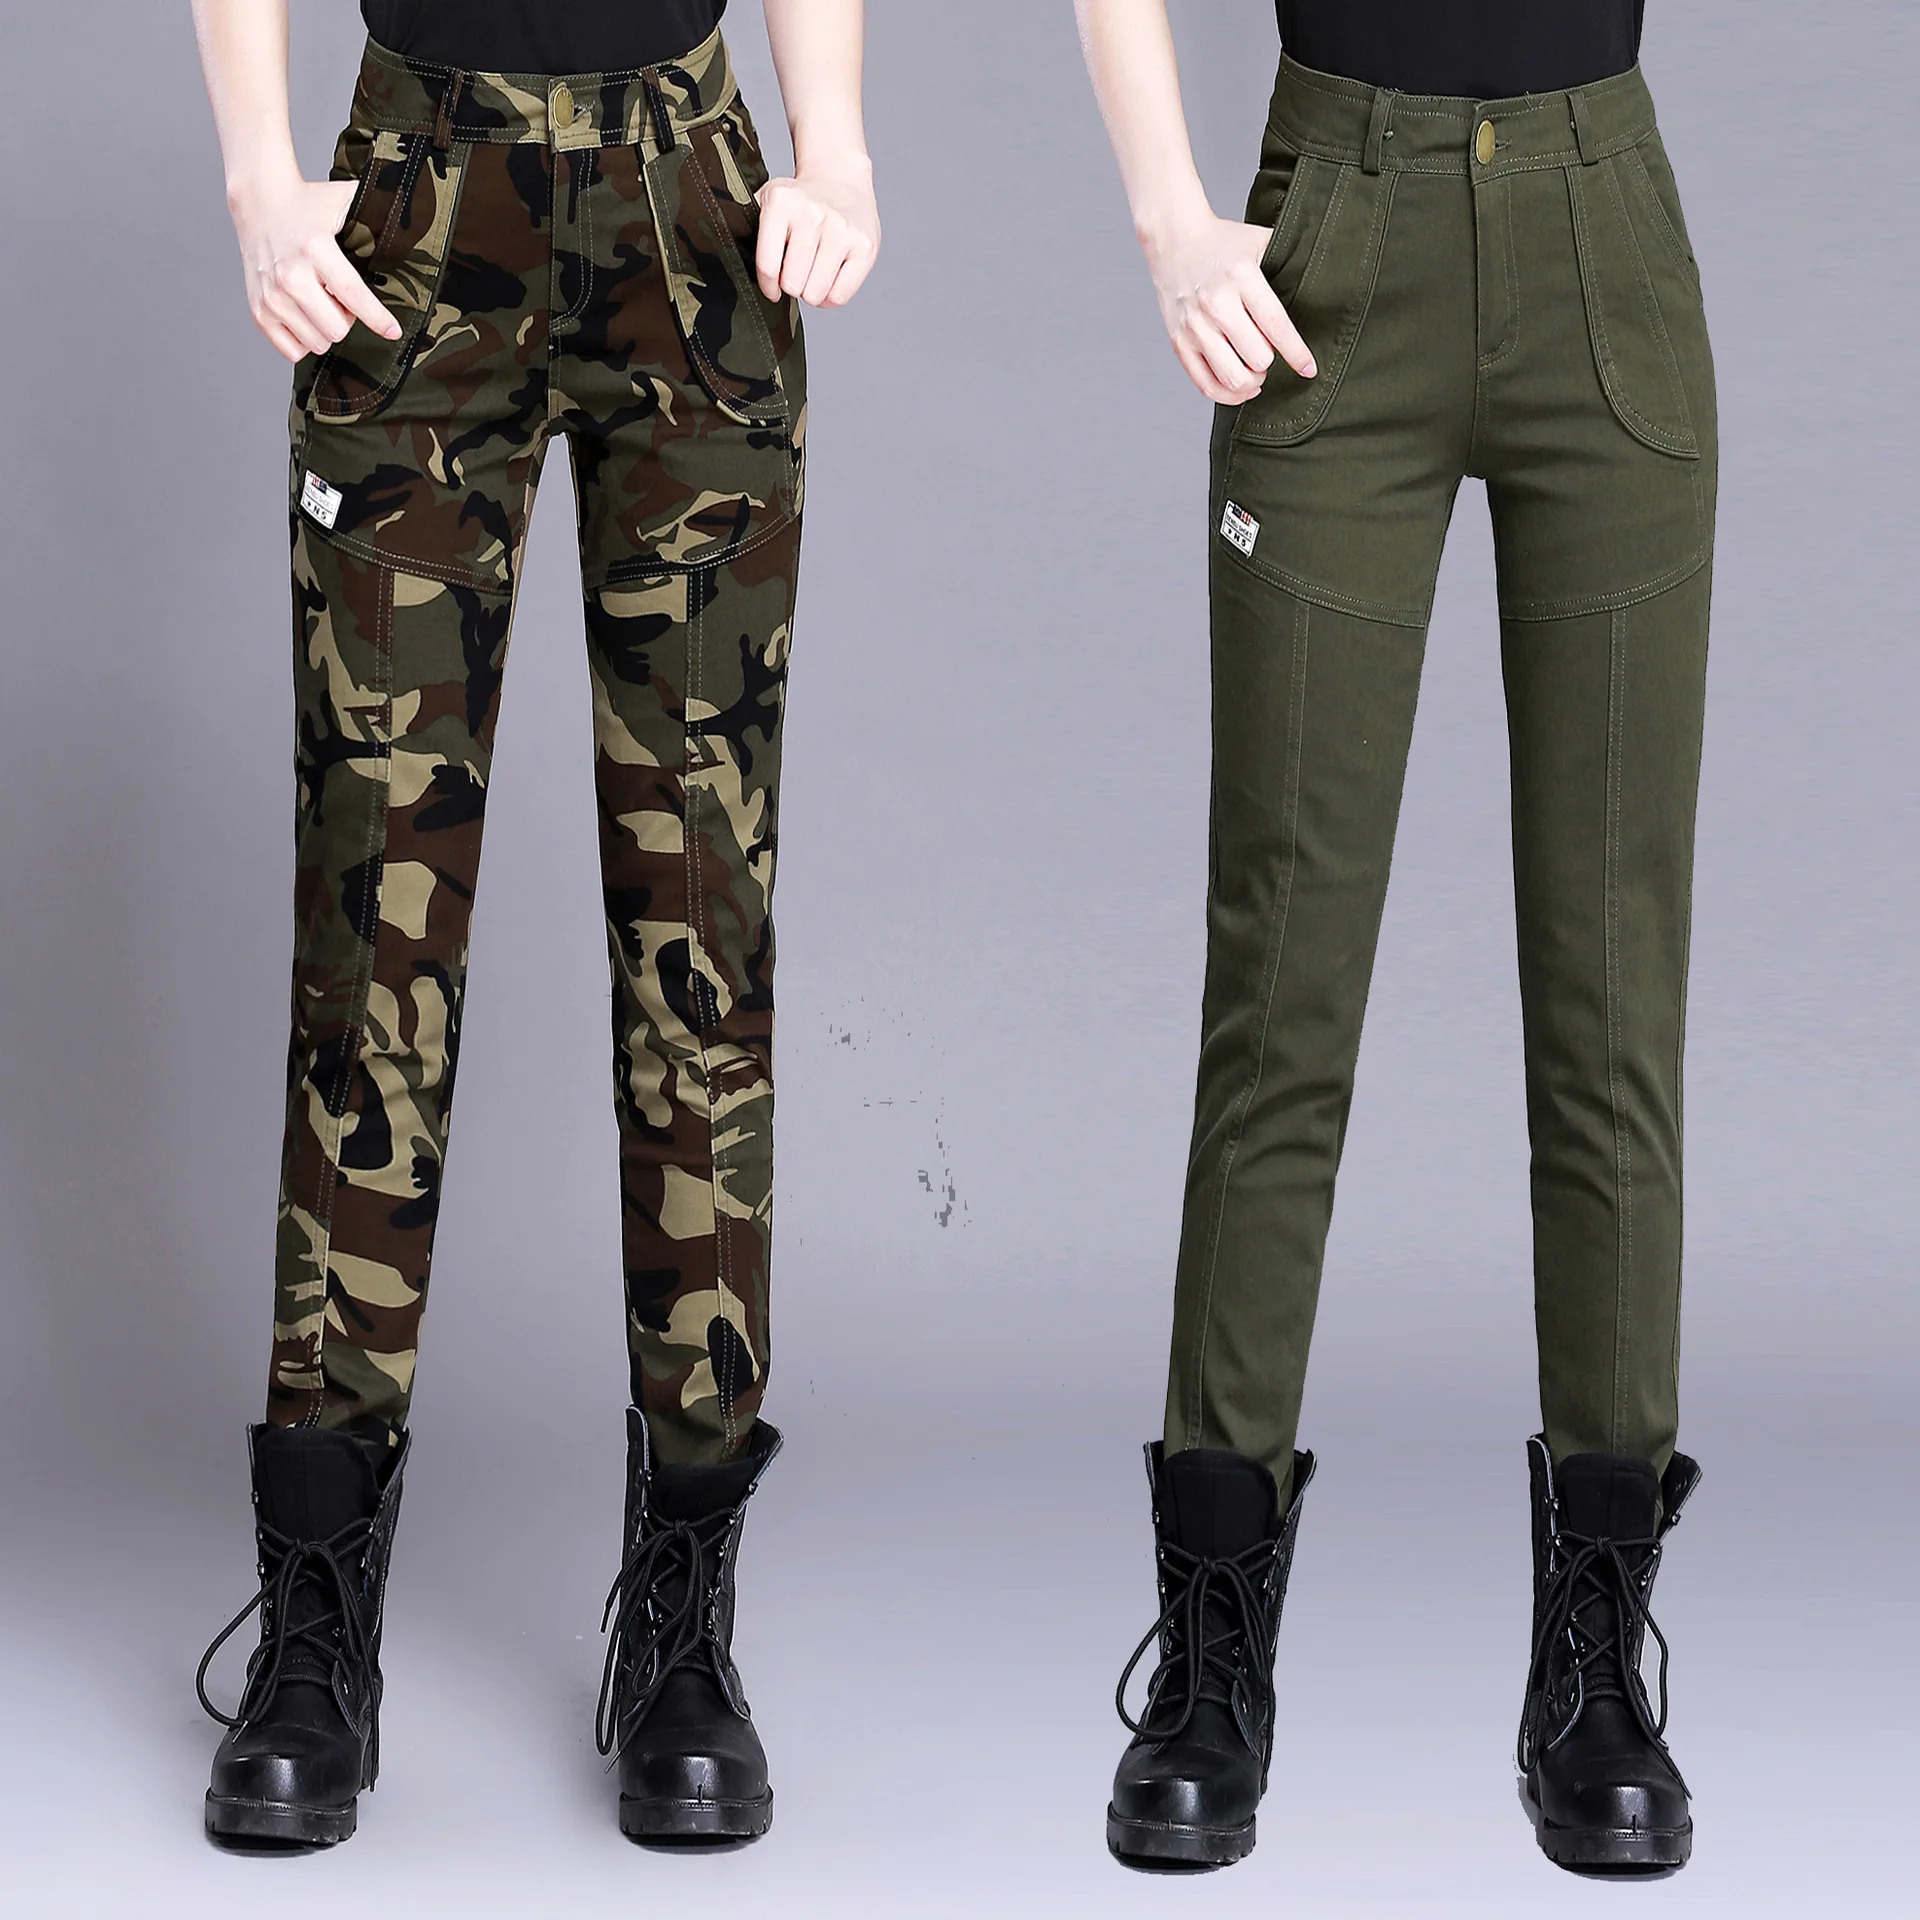 Women's High Waist Camouflage Army Pants Cotton Military Cargo Pants